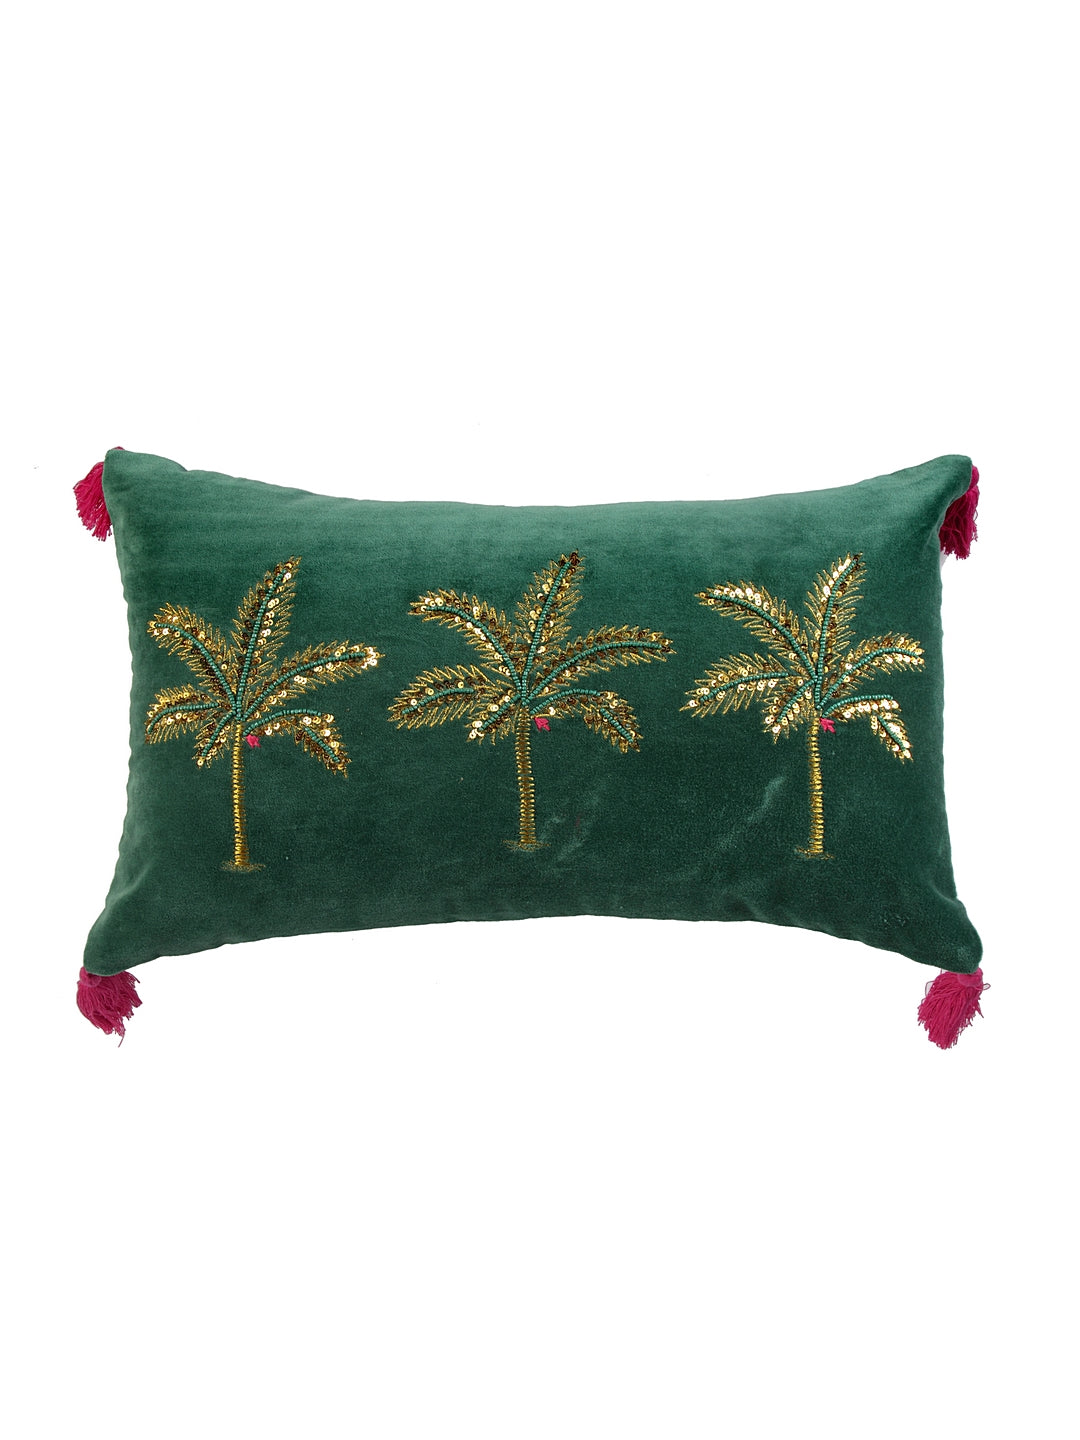 Blanc9 Golden Balsa Embroidered Cushion Cover with Filler 30x50cm